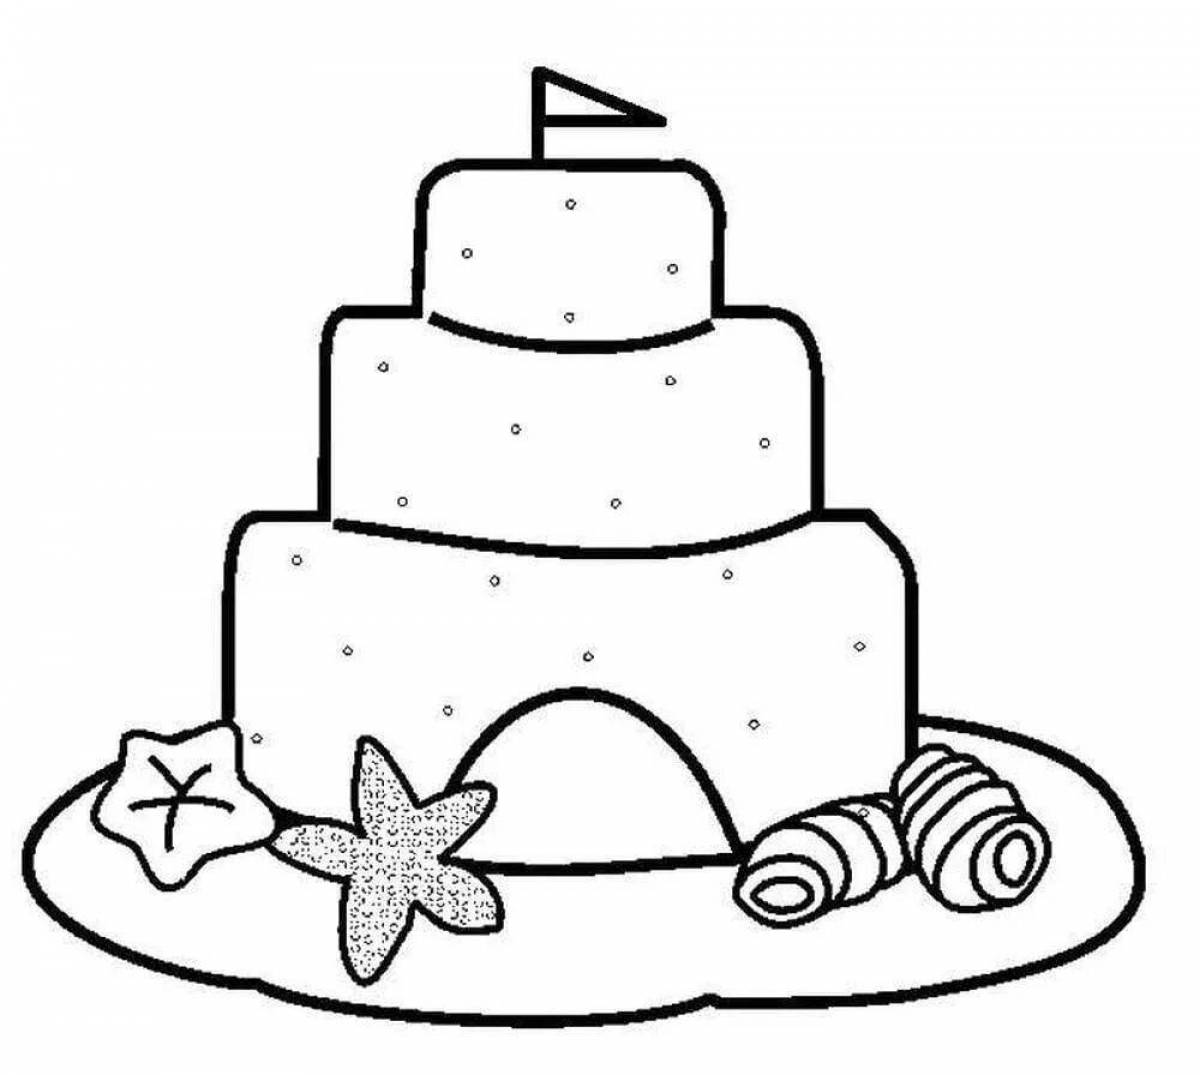 Cake drawing for kids #5